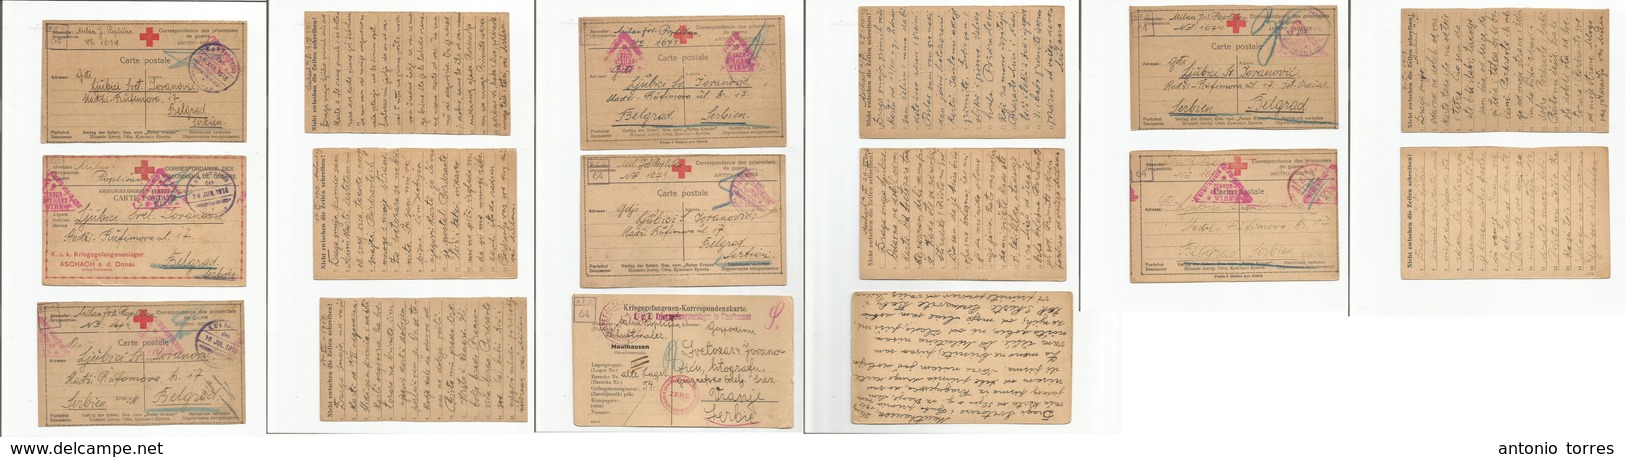 Military Mail. 1915-18. Serbian POW In Austrian Empire. Seven Diff Red Cross Items, With Cachets And Censor Marks. Addre - Military Mail (PM)